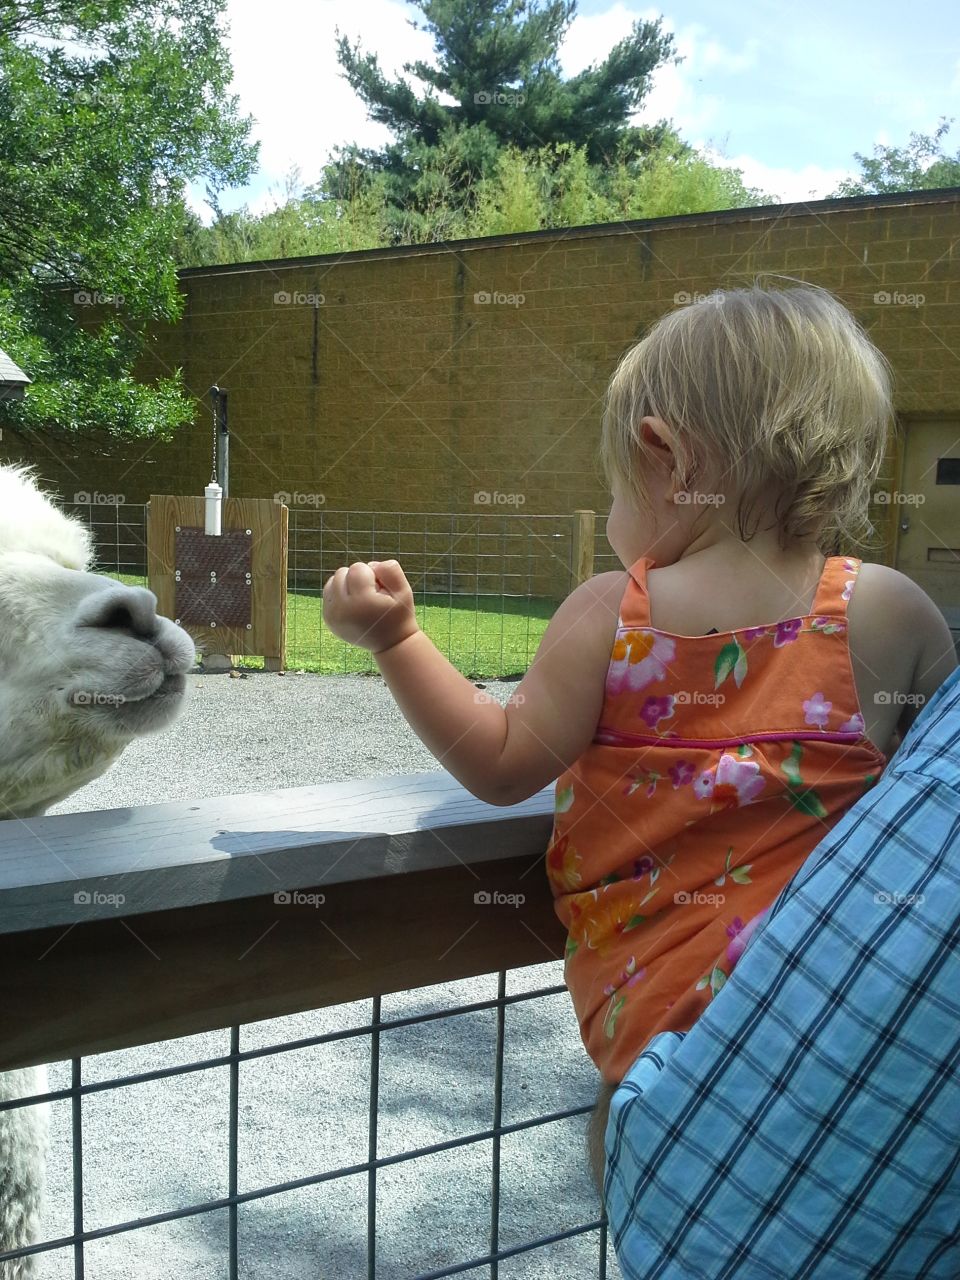 gabberz feeding an alpaca. she was trying to feed an alpaca without it touching her